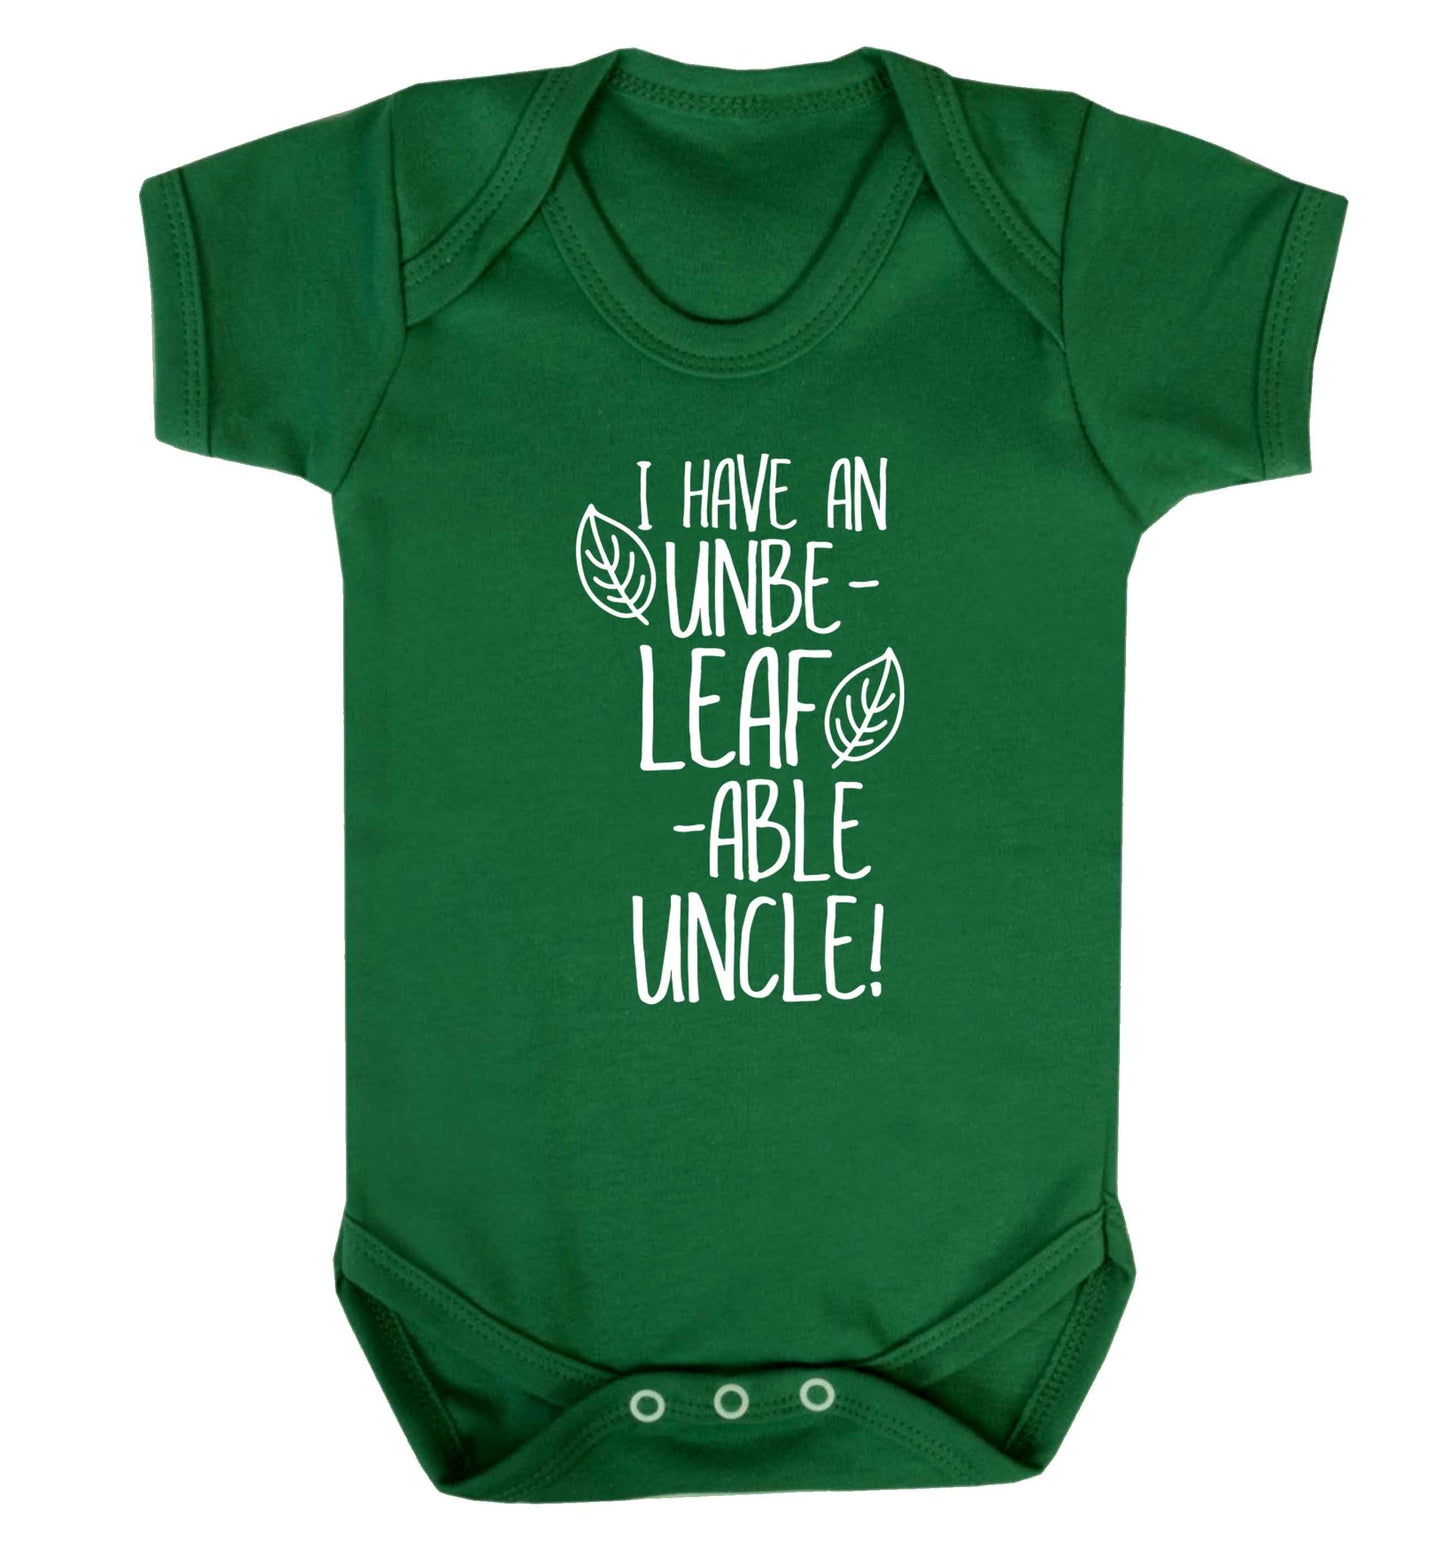 I have an unbe-leaf-able uncle Baby Vest green 18-24 months